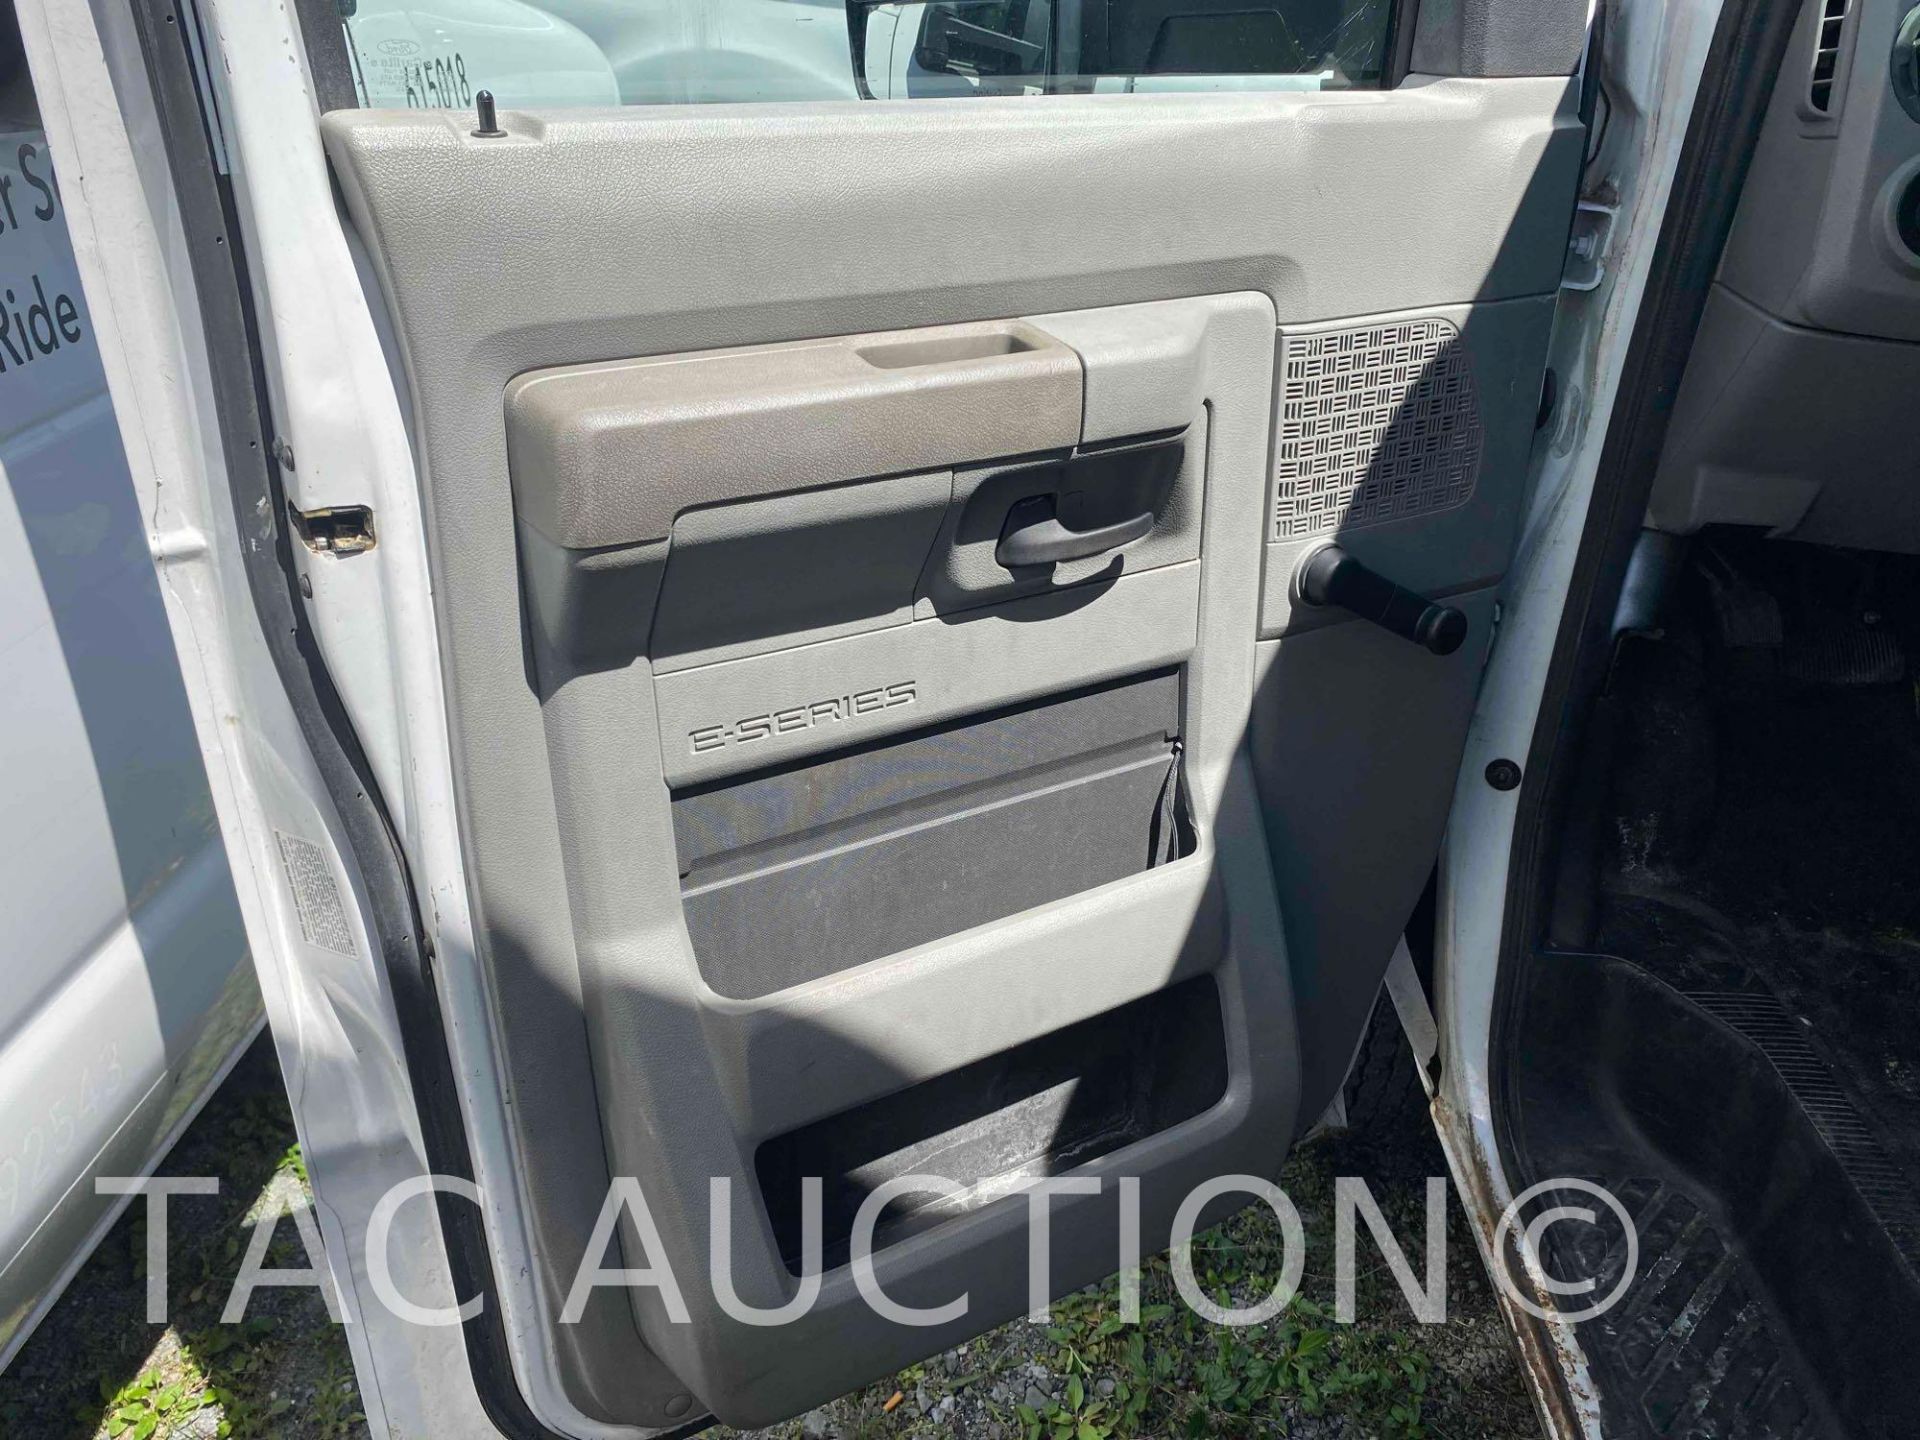 2016 Ford E-350 16ft Box Truck - Image 24 of 52